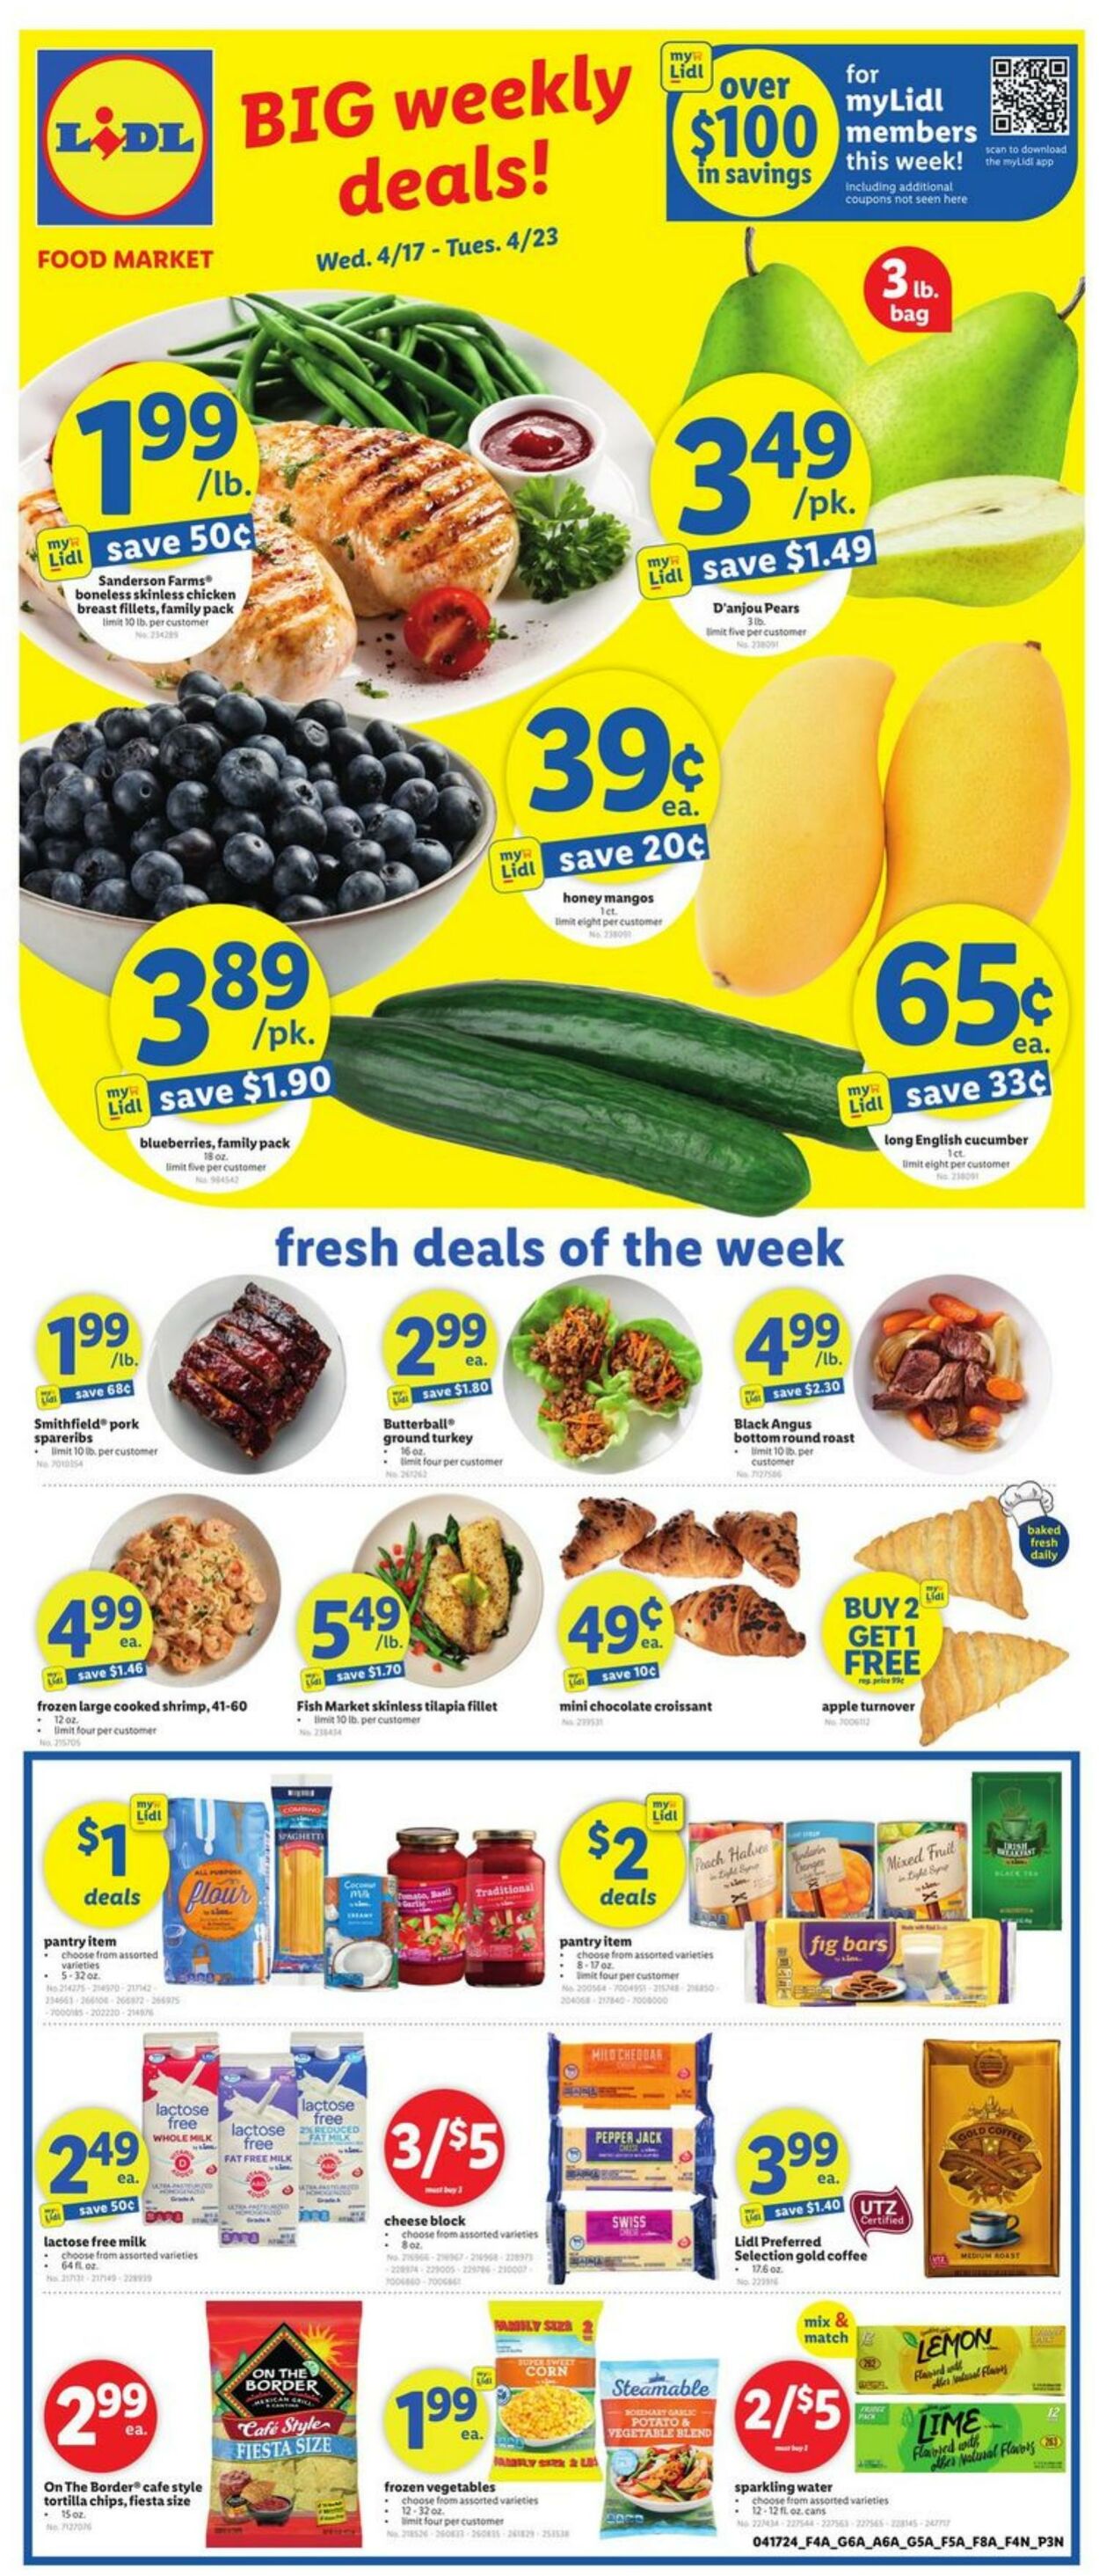 Lidl Promotional weekly ads